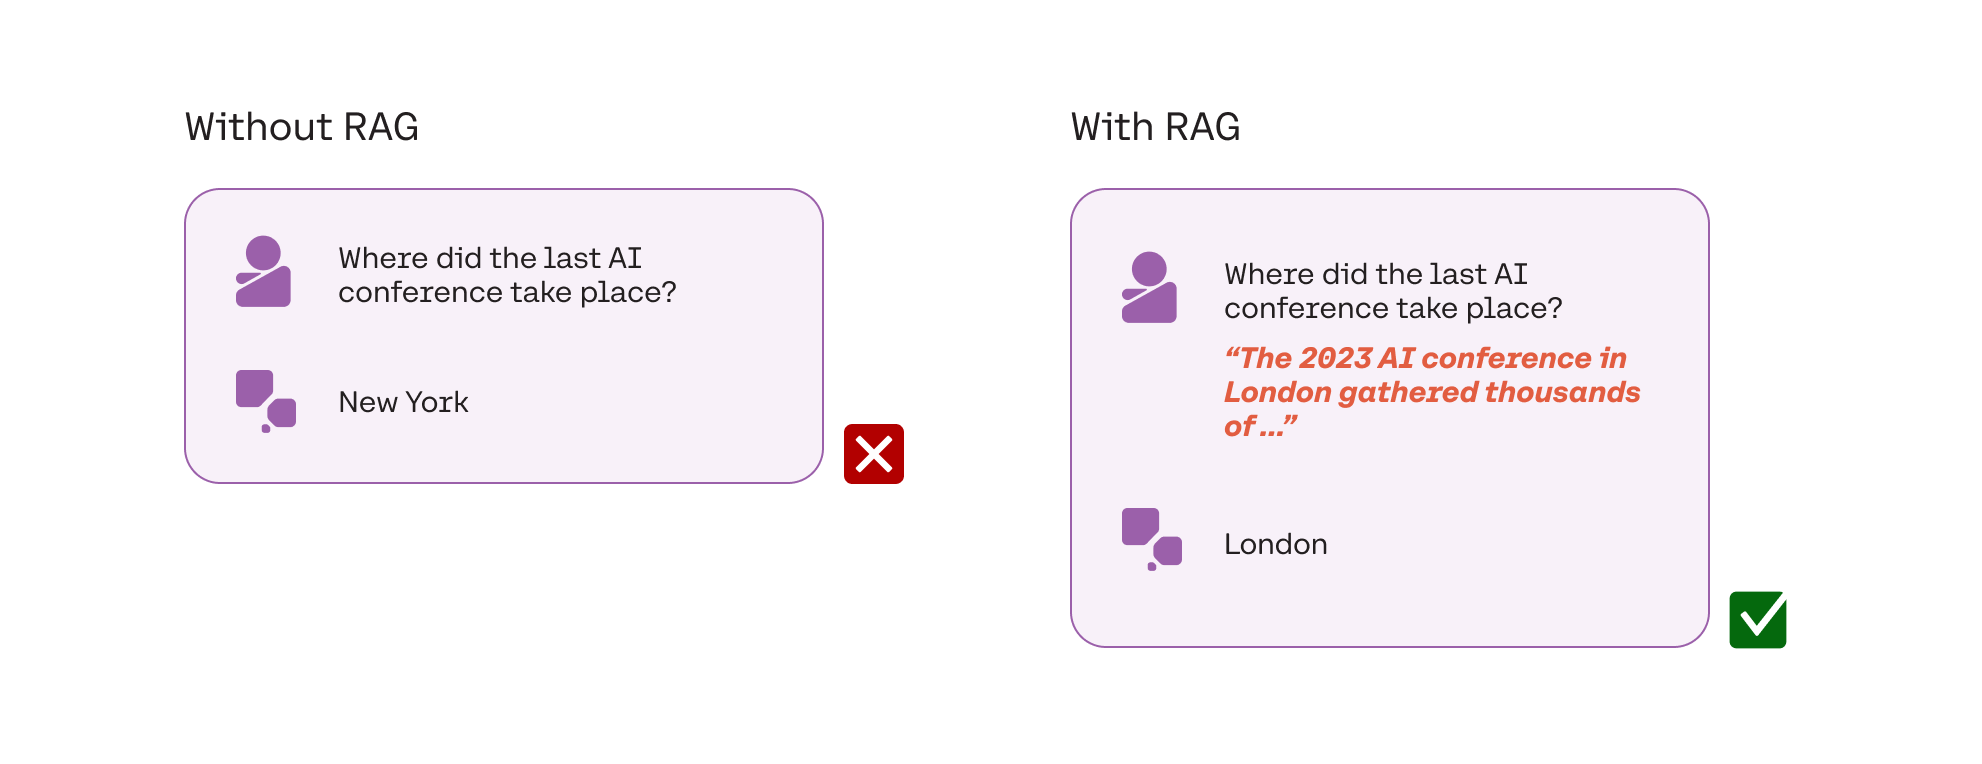 RAG solves the lack of specific knowledge problem